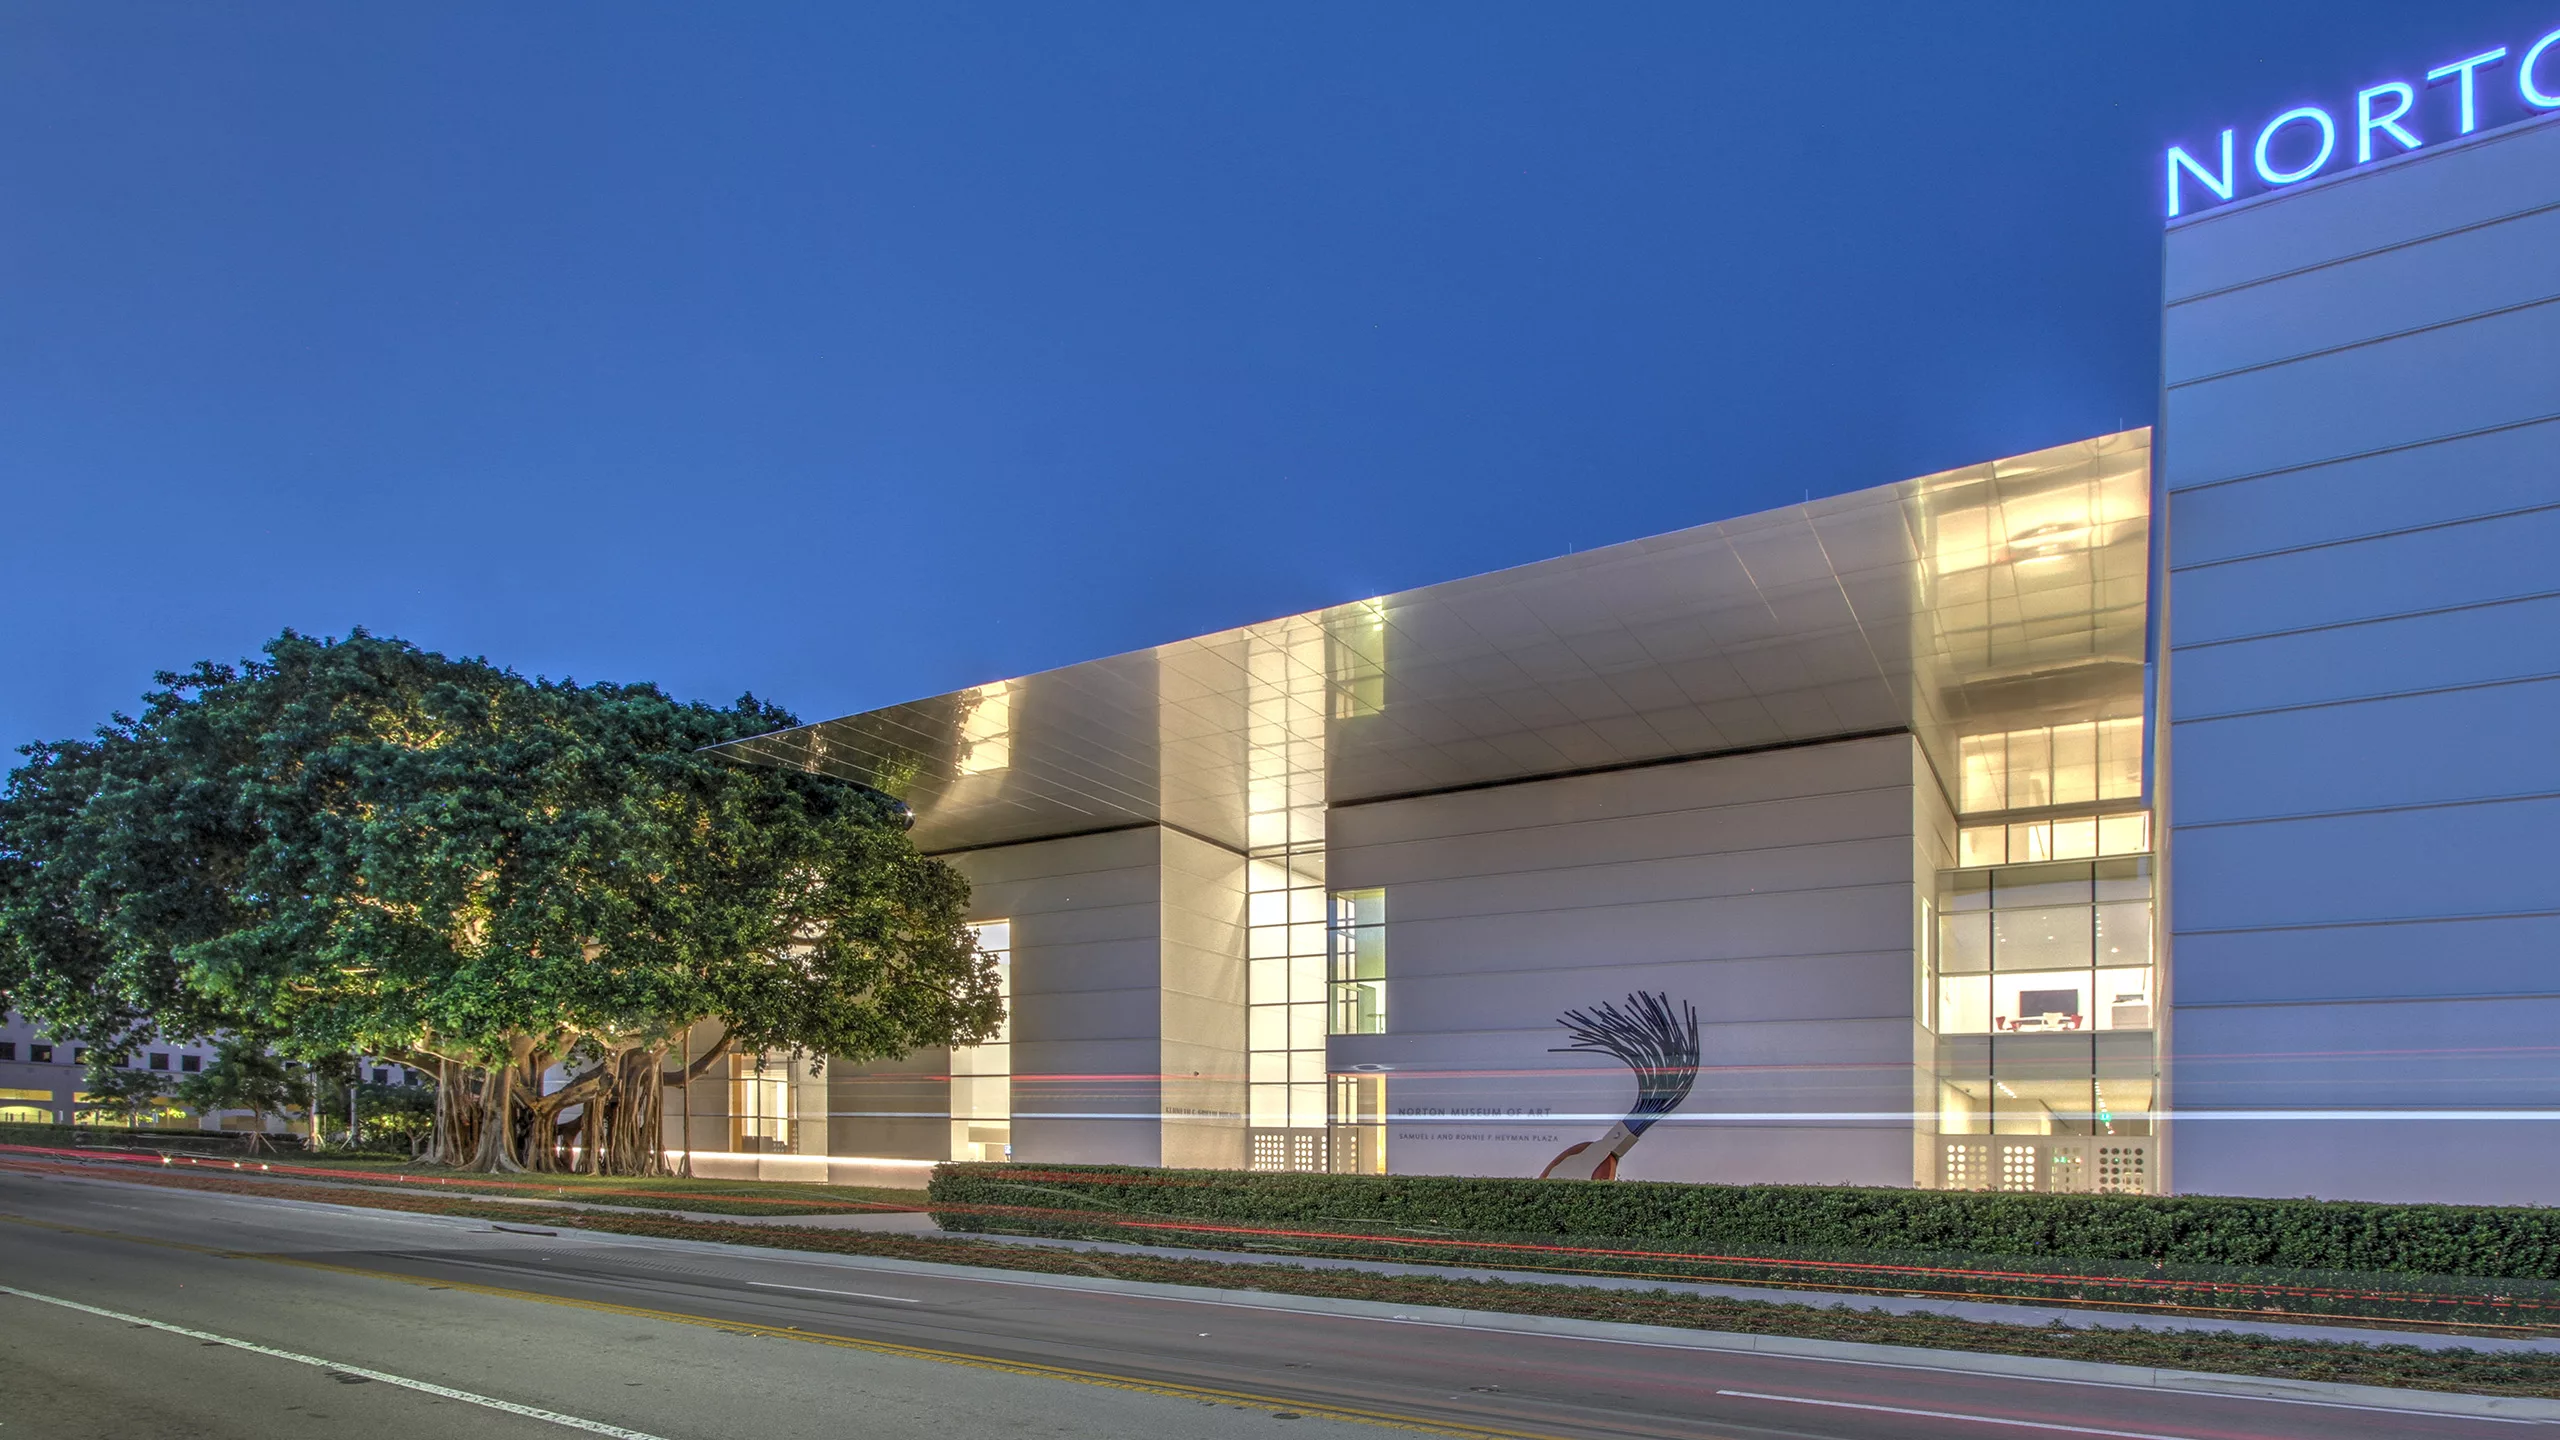 Exterior twilight view of the illuminated steel-and-glass entrance to the Norton Museum of Art Expansion, with bonsai tree and outdoor public art